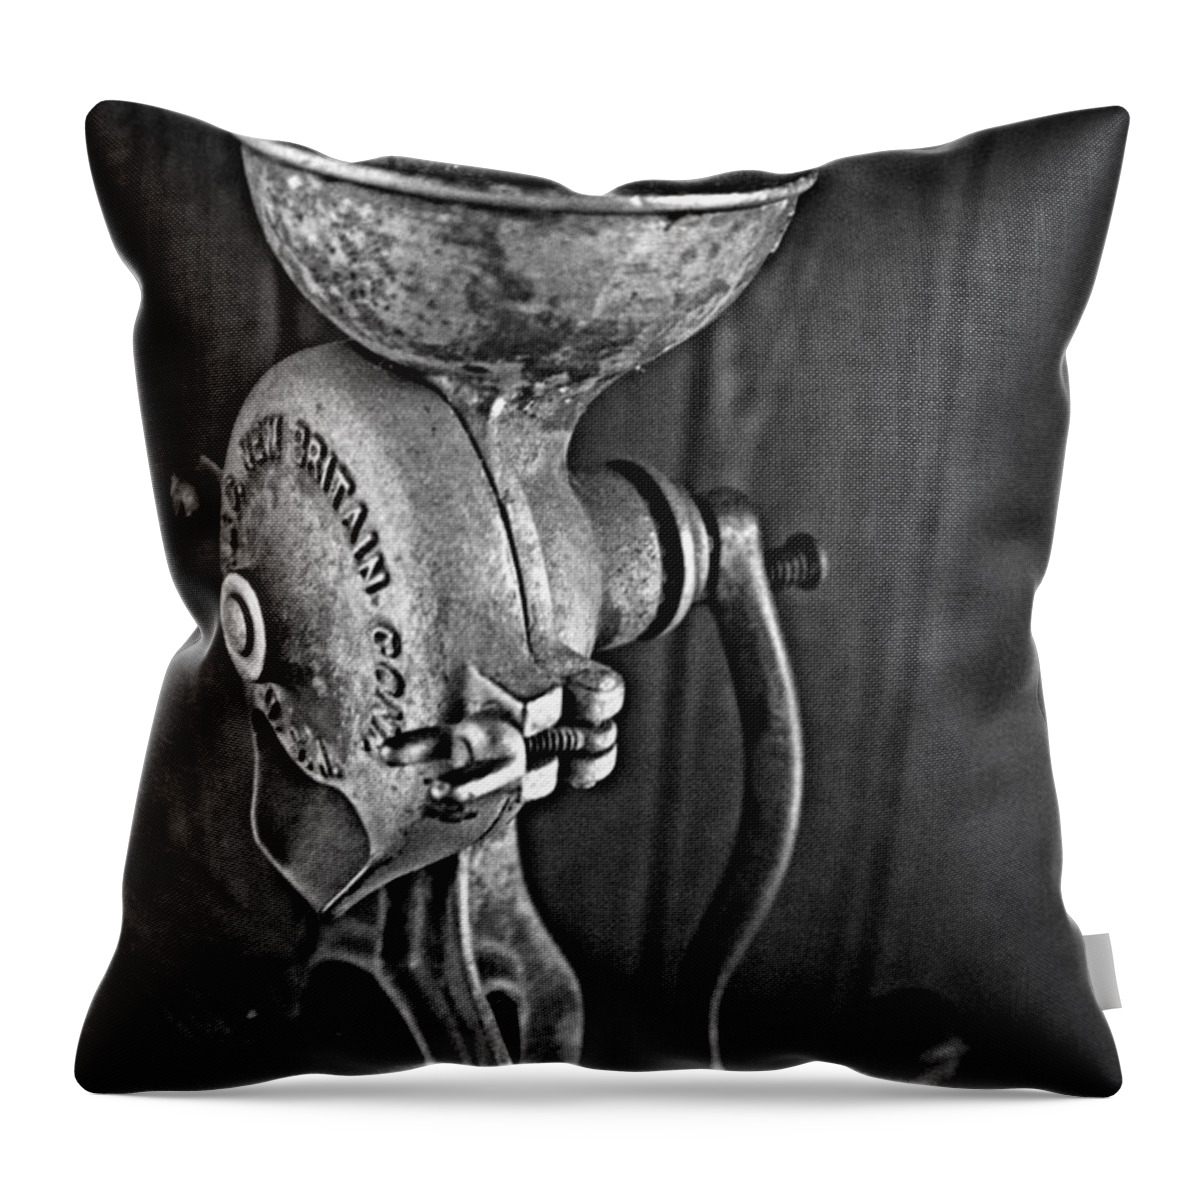 Antique Grinder Throw Pillow featuring the photograph Vintage Grinder by Southern Photo